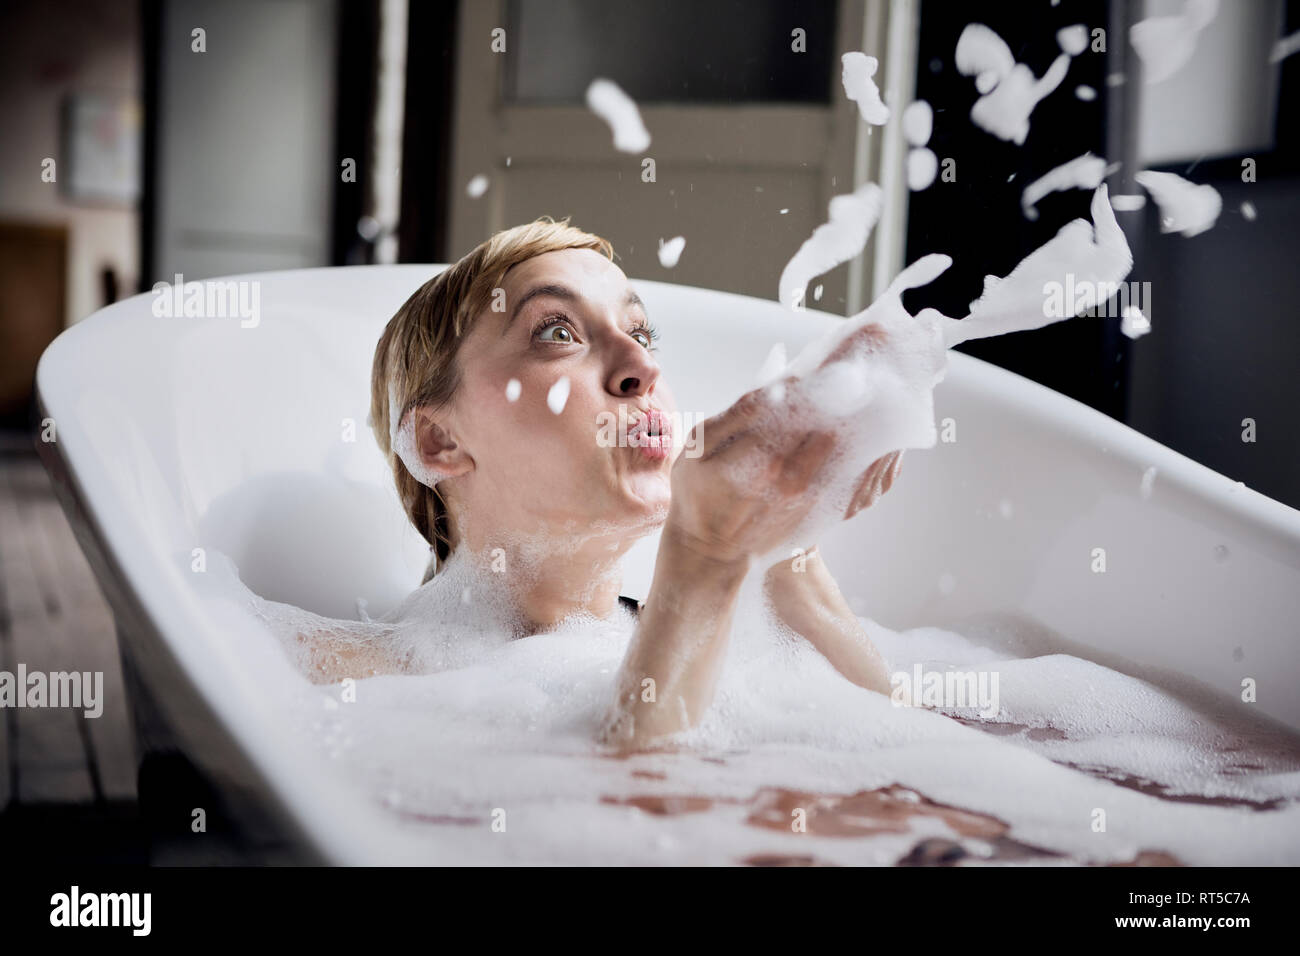 Blond woman taking bubble bath blowing foam in the air Stock Photo